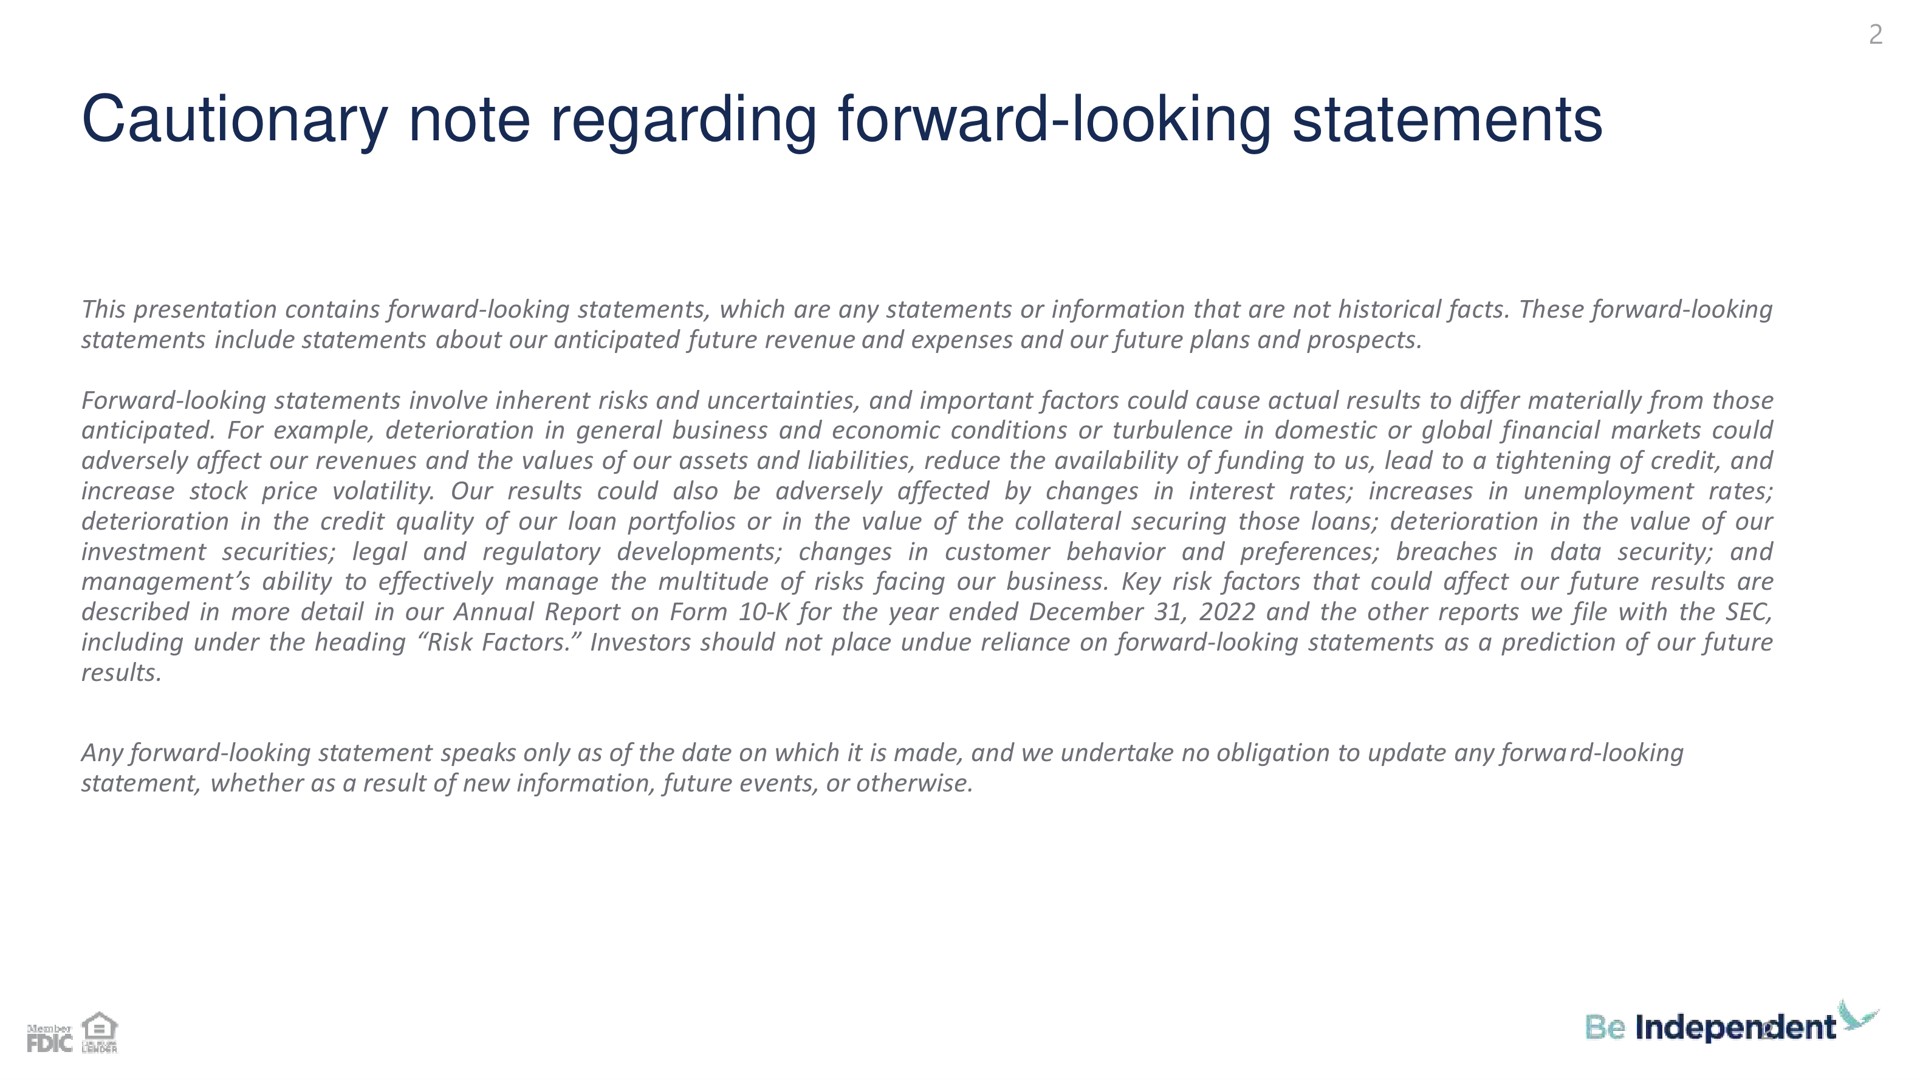 cautionary note regarding forward looking statements | Independent Bank Corp